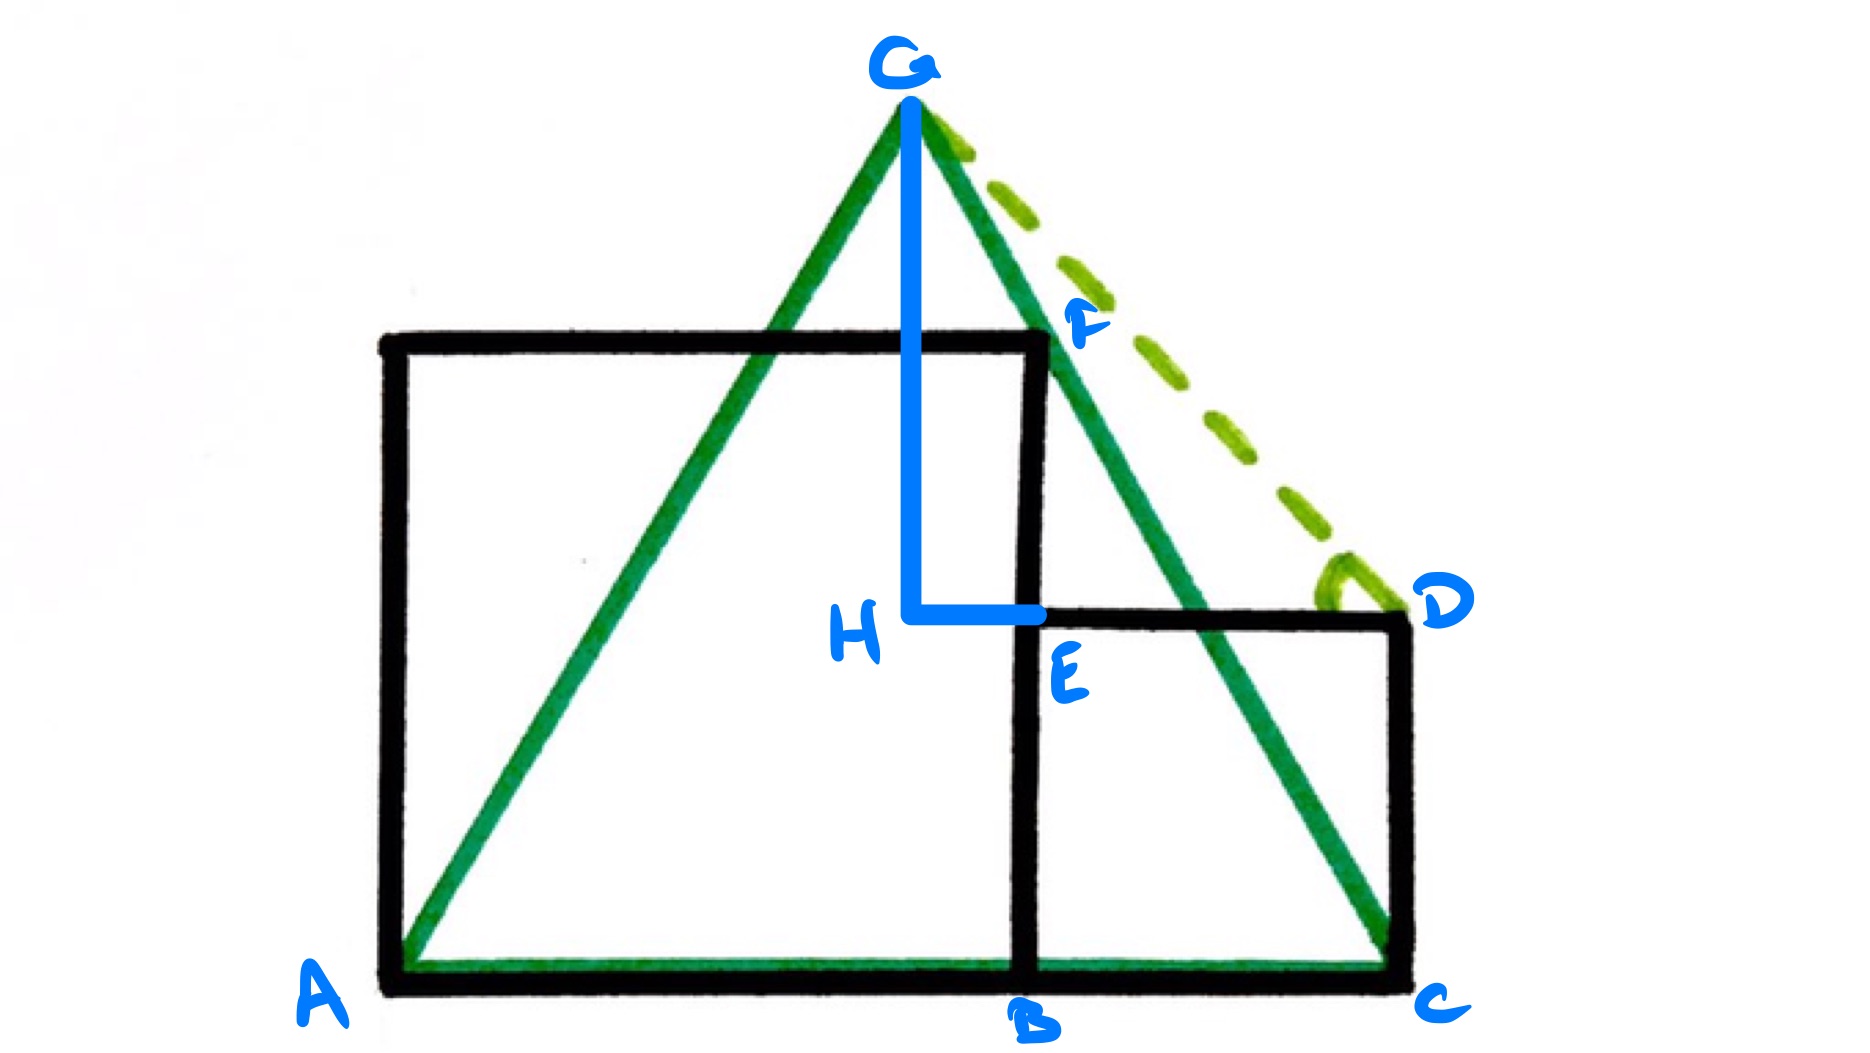 Two squares and an equilateral triangle labelled